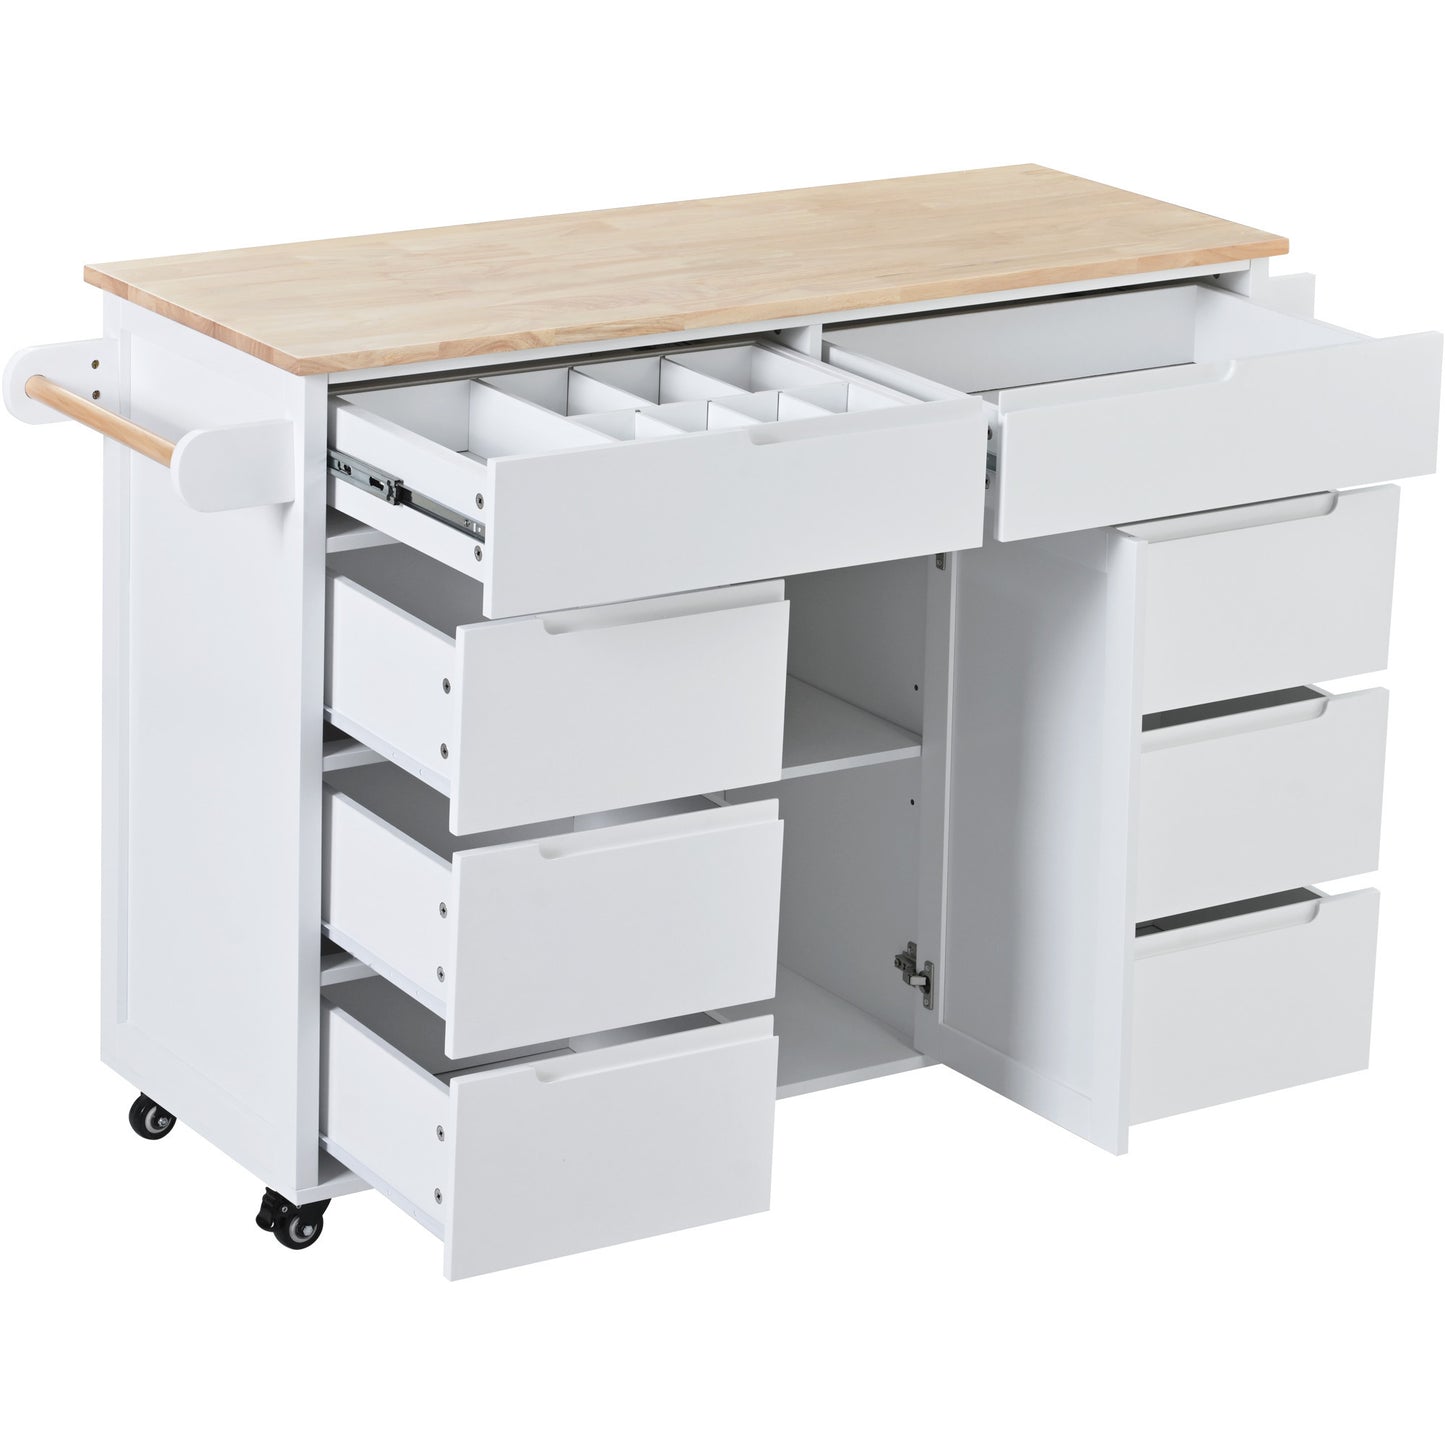 K&K Store Kitchen Cart with Rubber Wood Countertop , Kitchen Island has 8 Handle-Free Drawers Including a Flatware Organizer and 5 Wheels for Kitchen Dinning Room, White